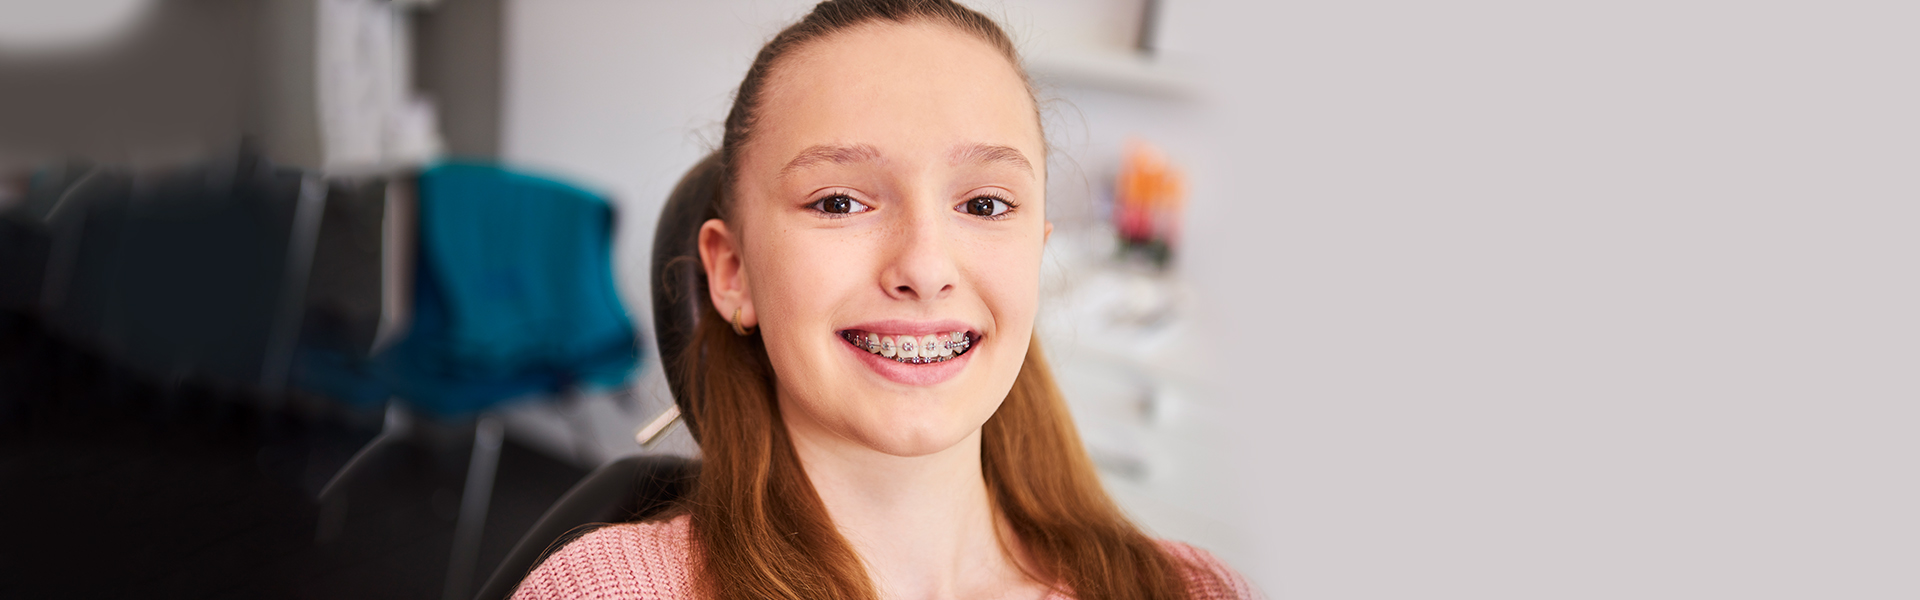 Start Your New Year with Braces for Perfect Smile